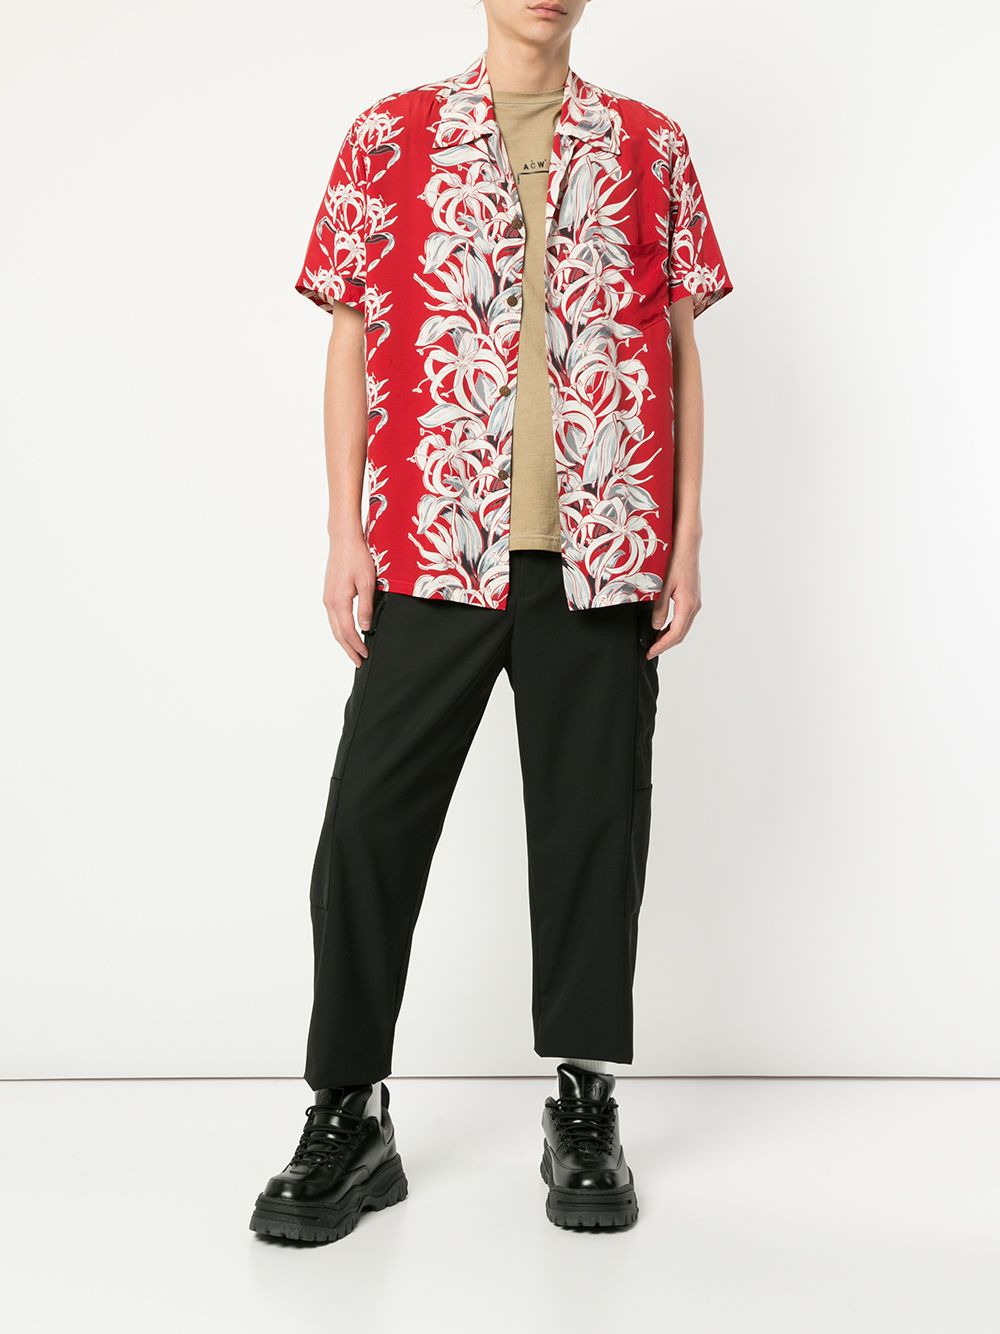 Shop red Fake Alpha Vintage 1950's Hawaiian shirt with Express Delivery ...